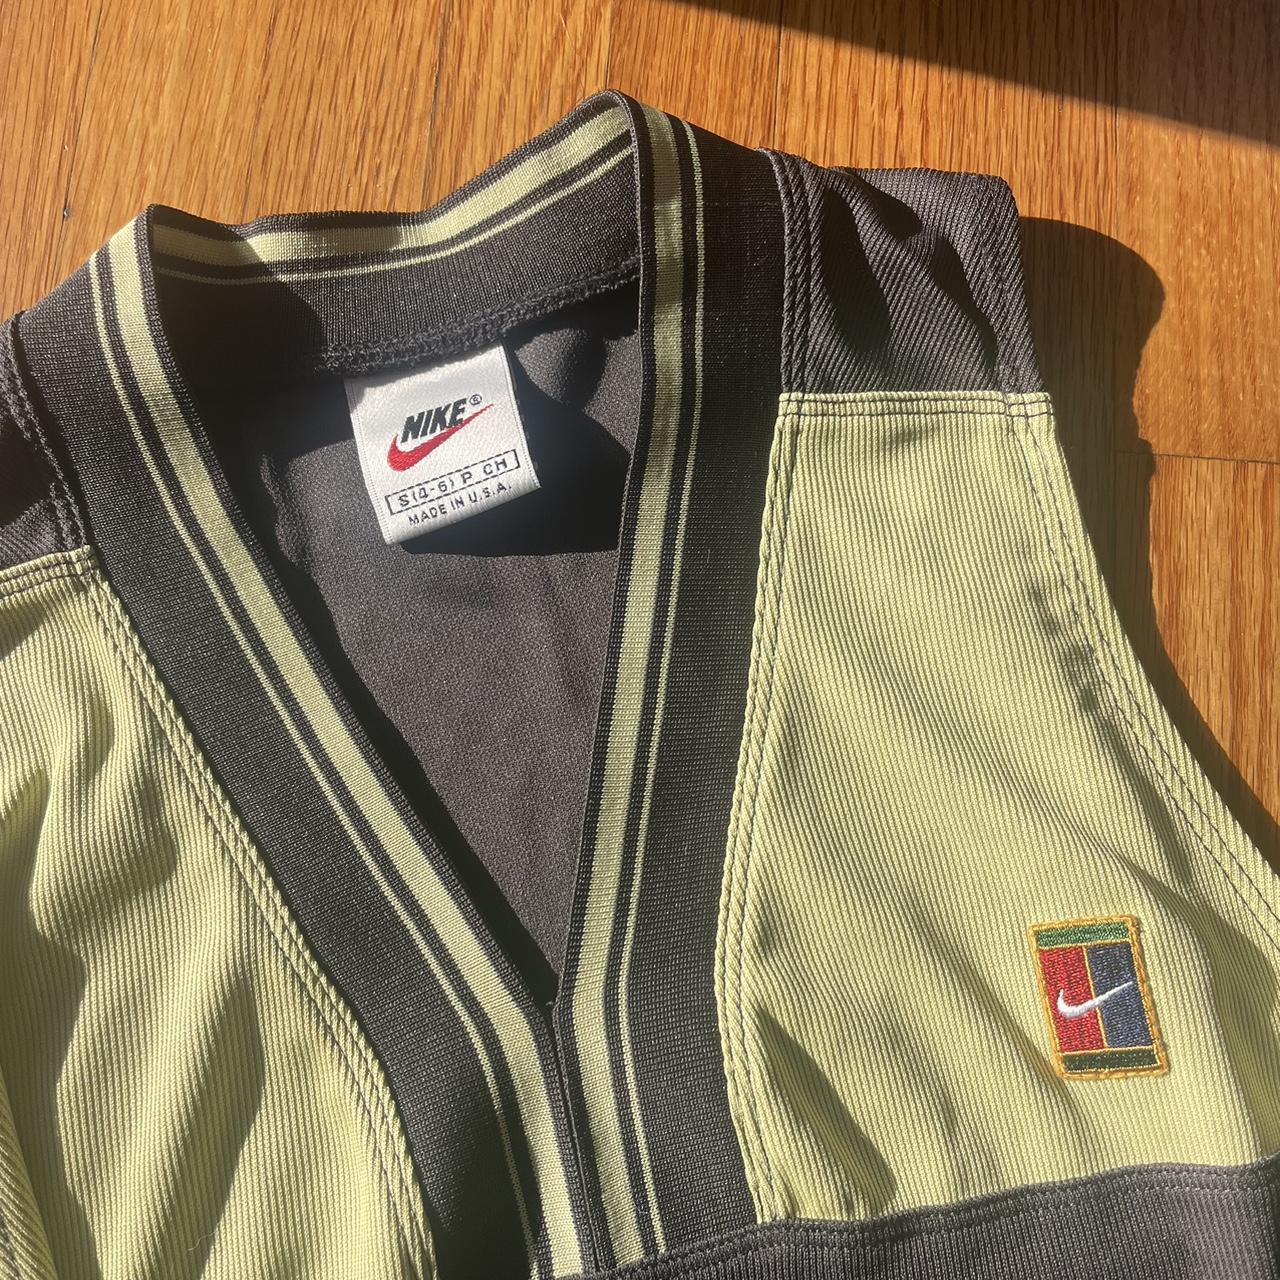 Nike Exercise Dress. Fits size small. I’m 5’7 and... - Depop